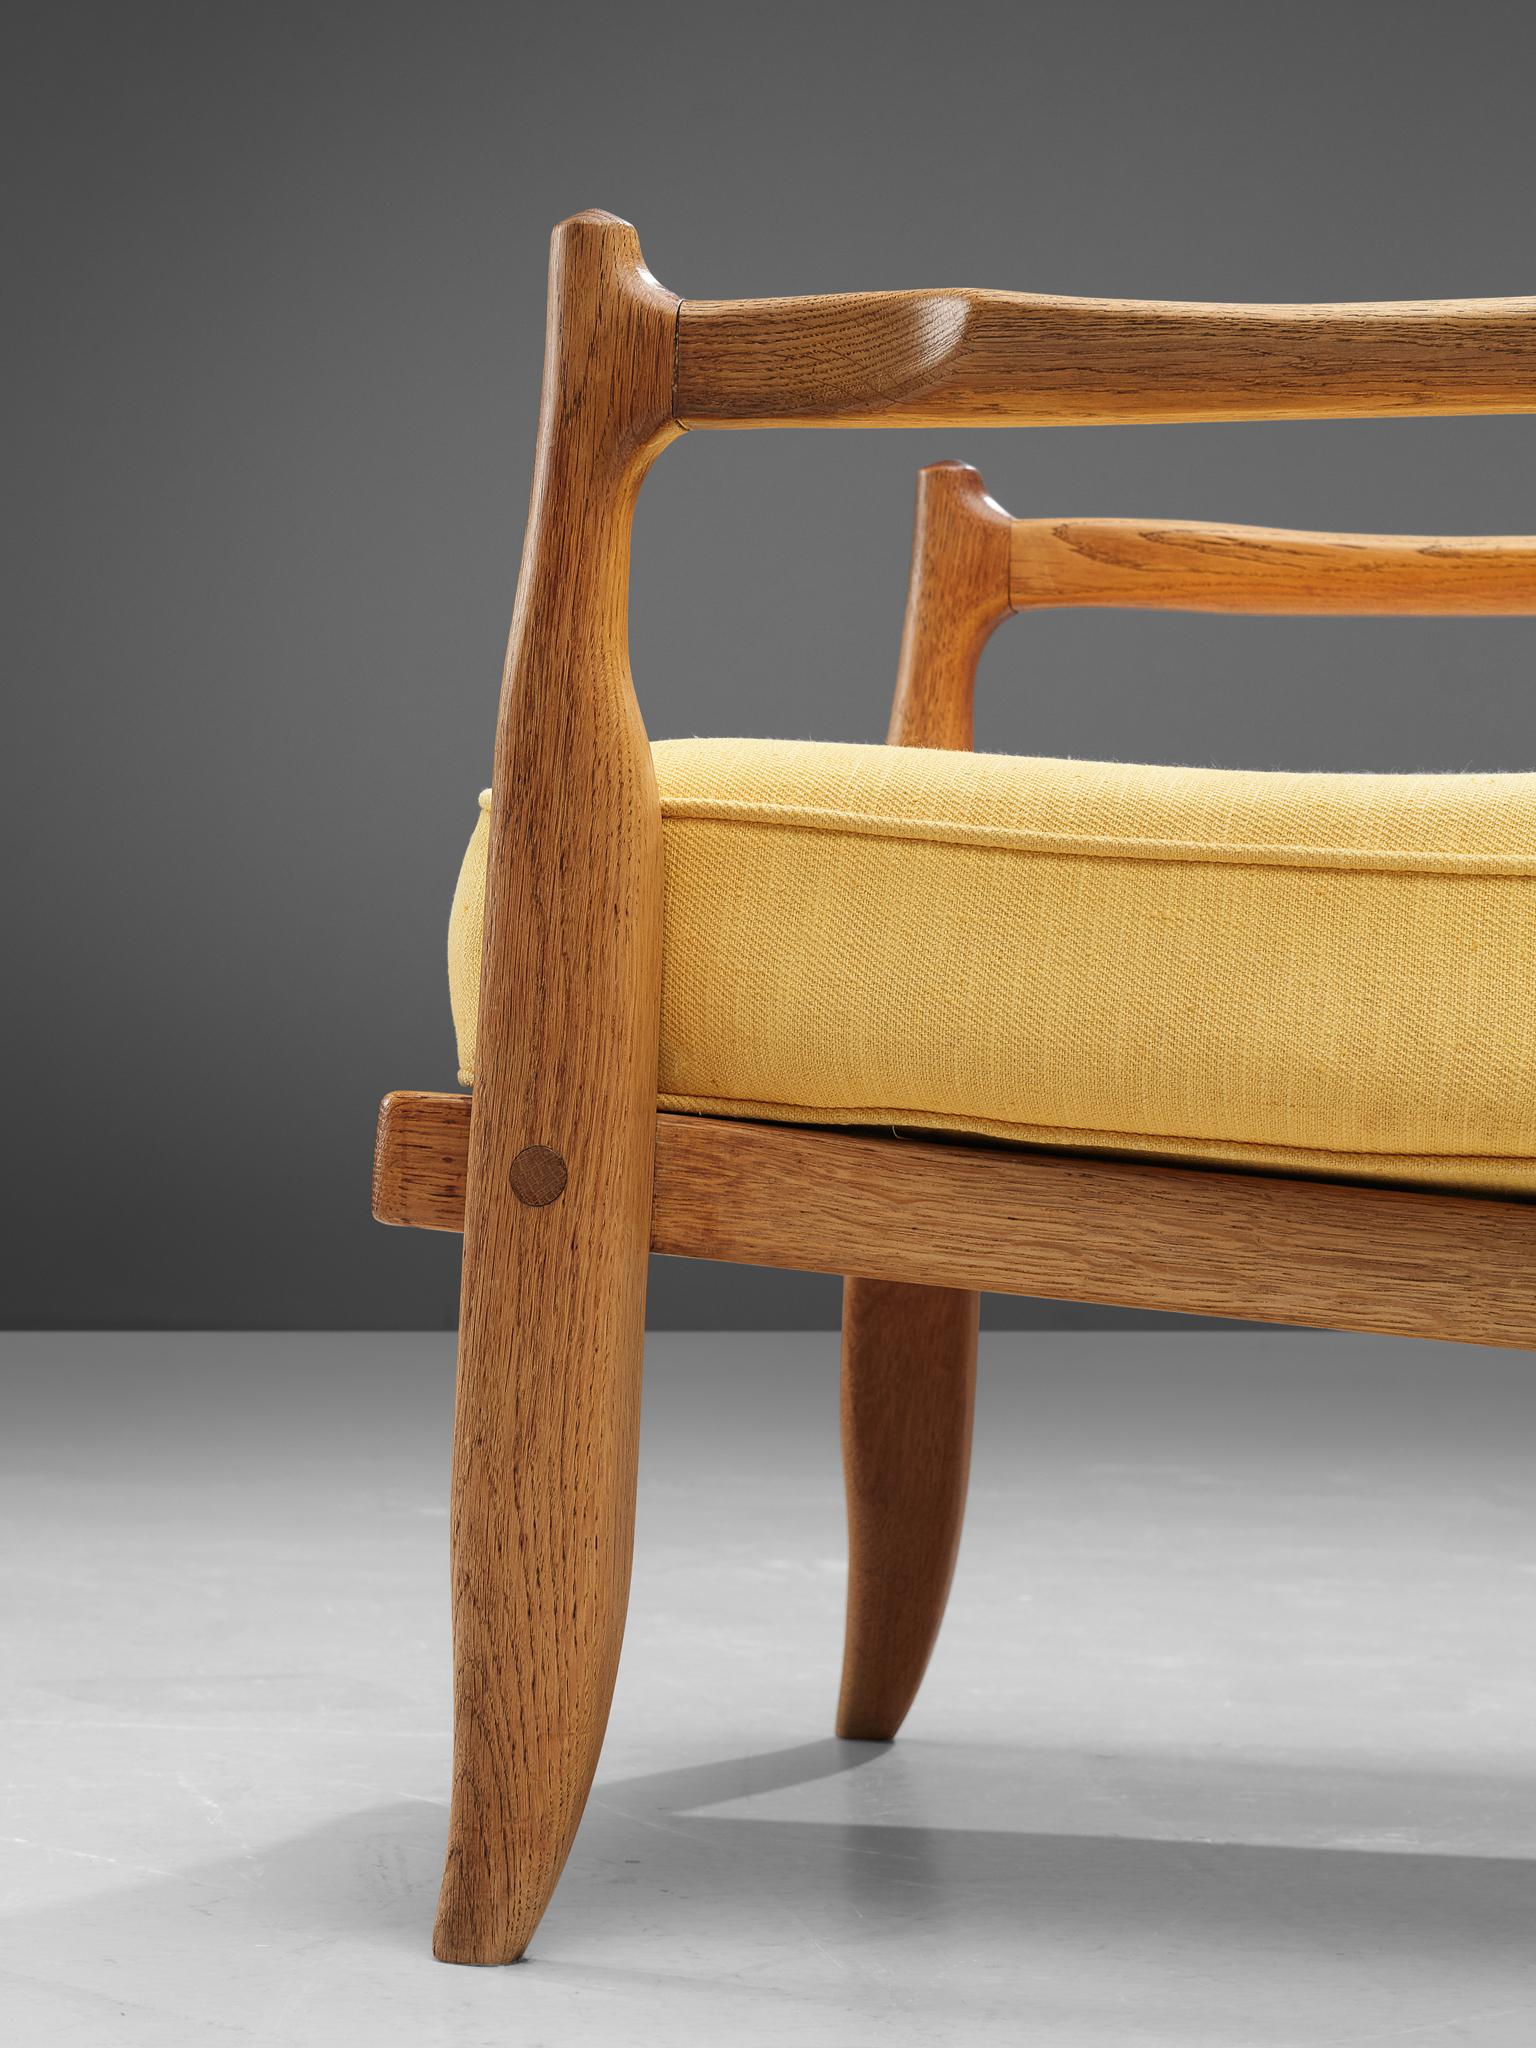 Fabric Guillerme & Chambron Lounge Chair in Solid Oak, France, 1960s